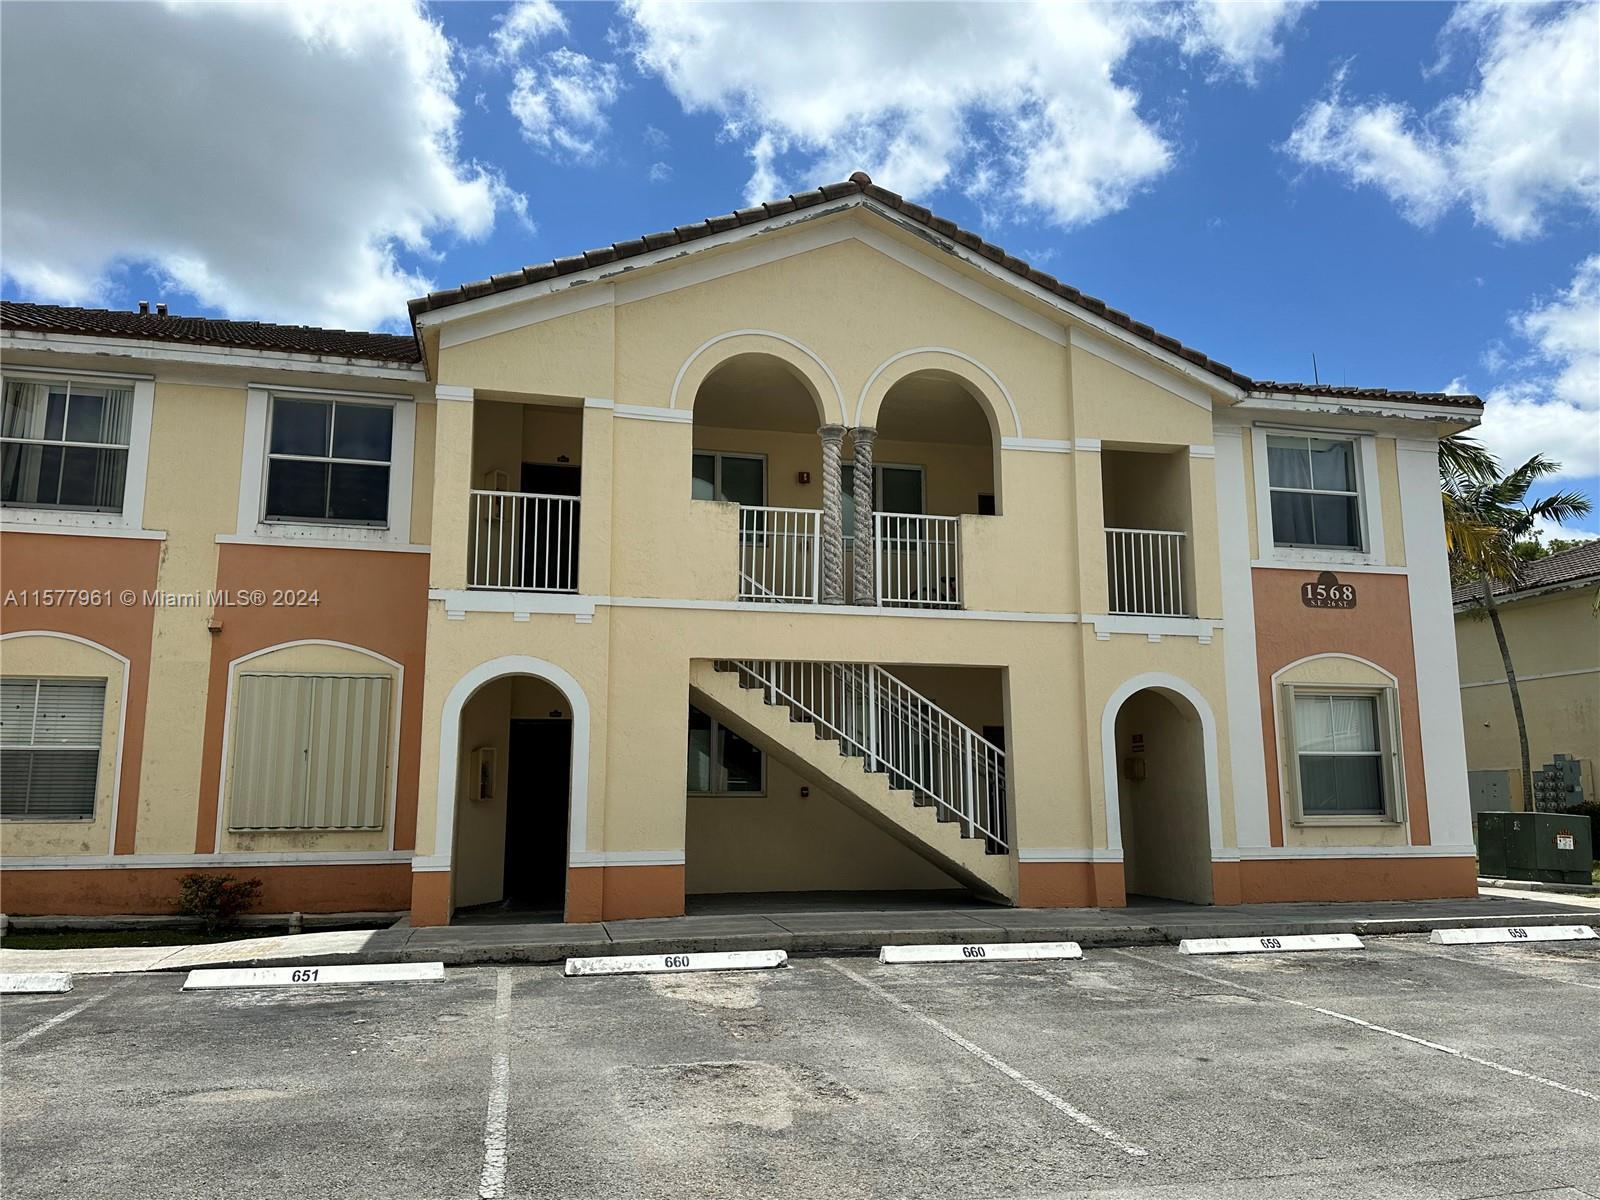 Photo of 1568 SE 26th St #101 in Homestead, FL